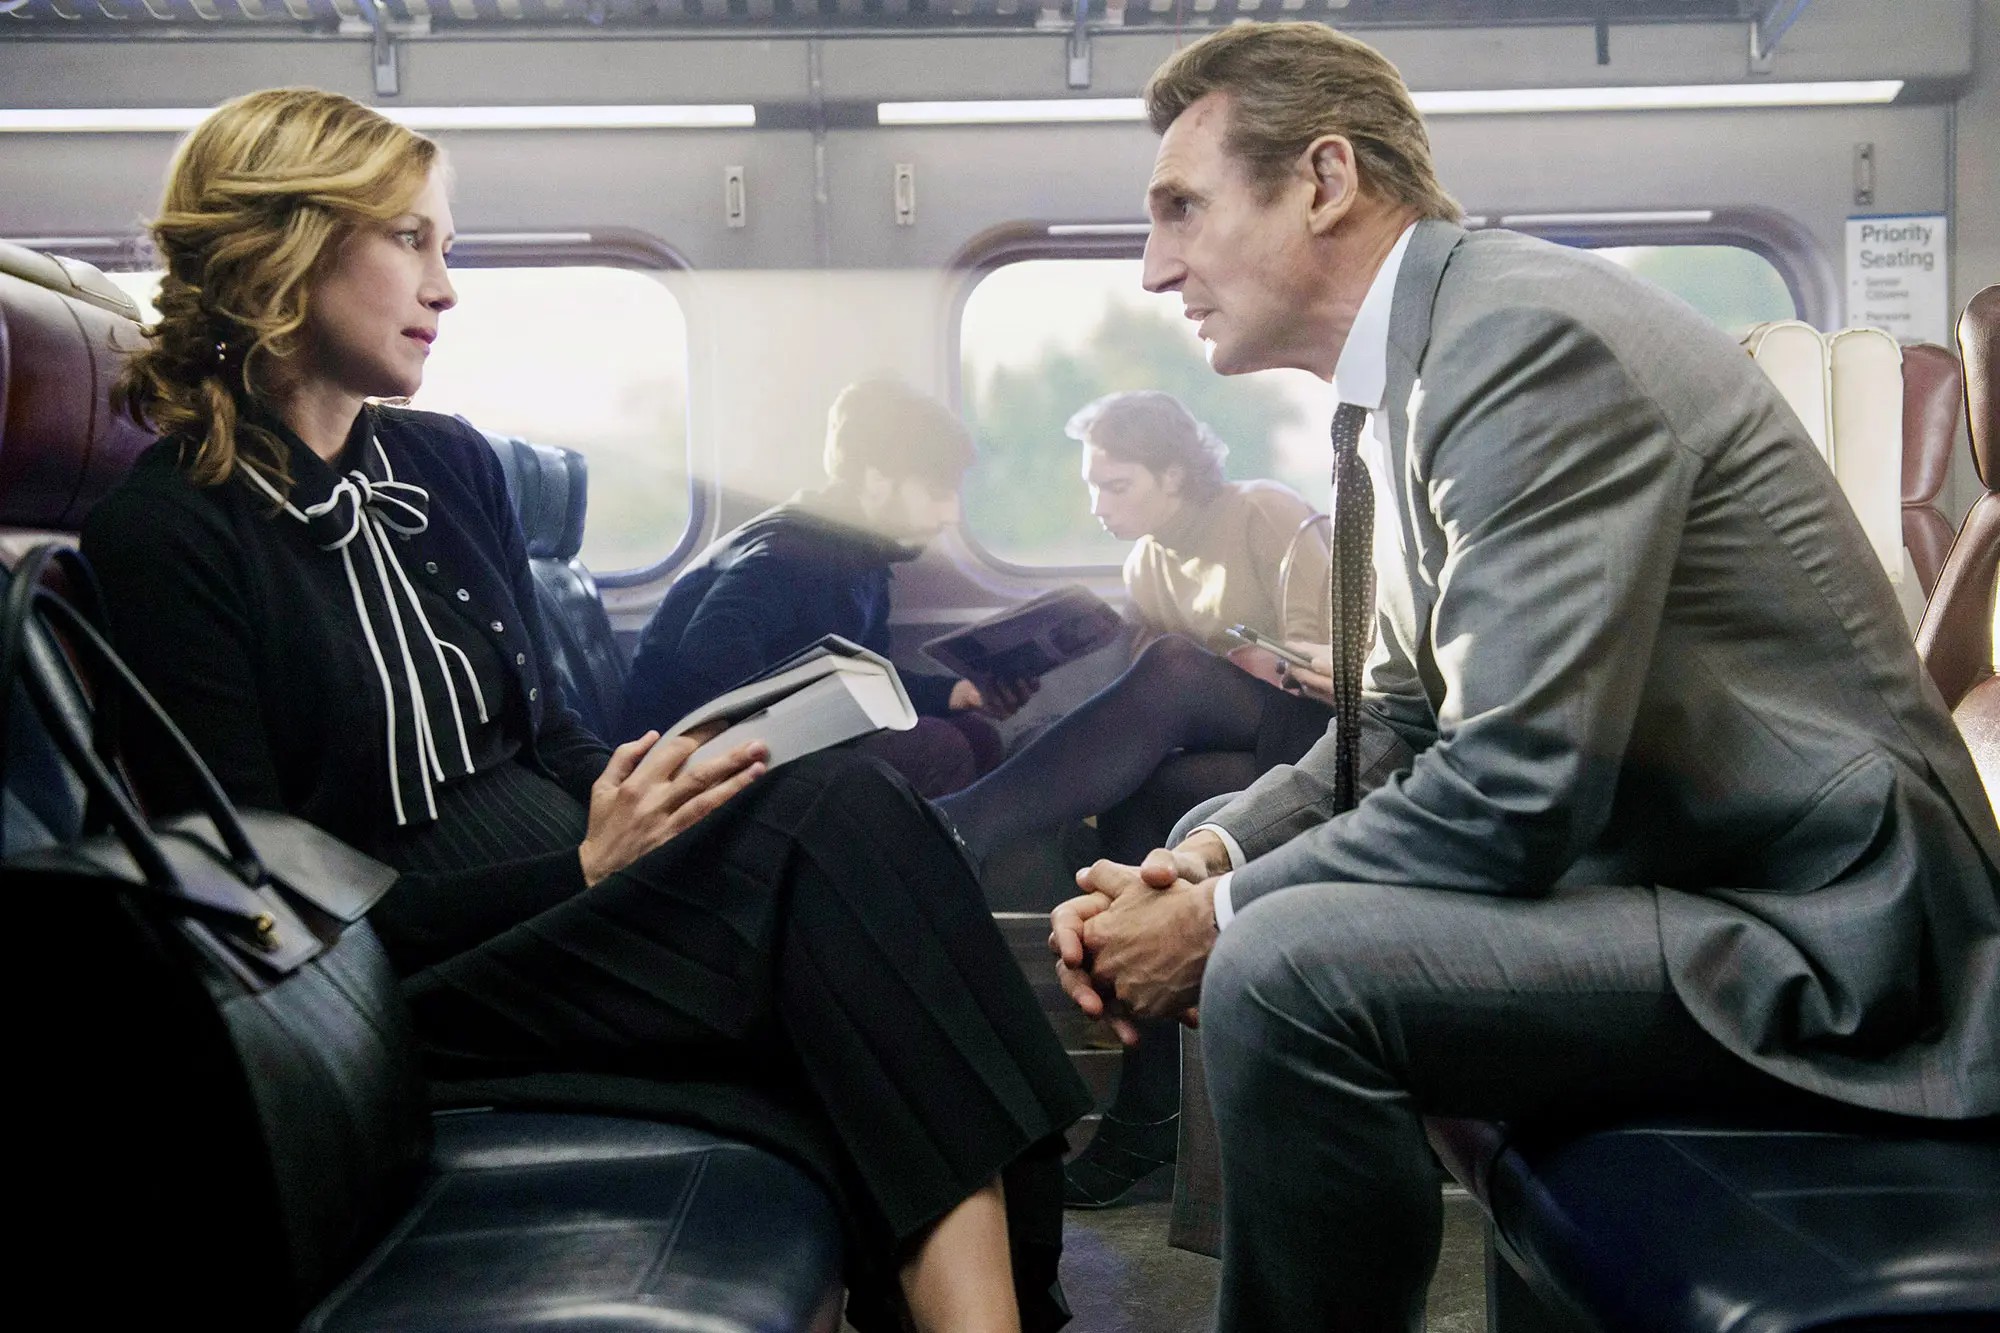 A man and a woman sit on a train in The Commuter.